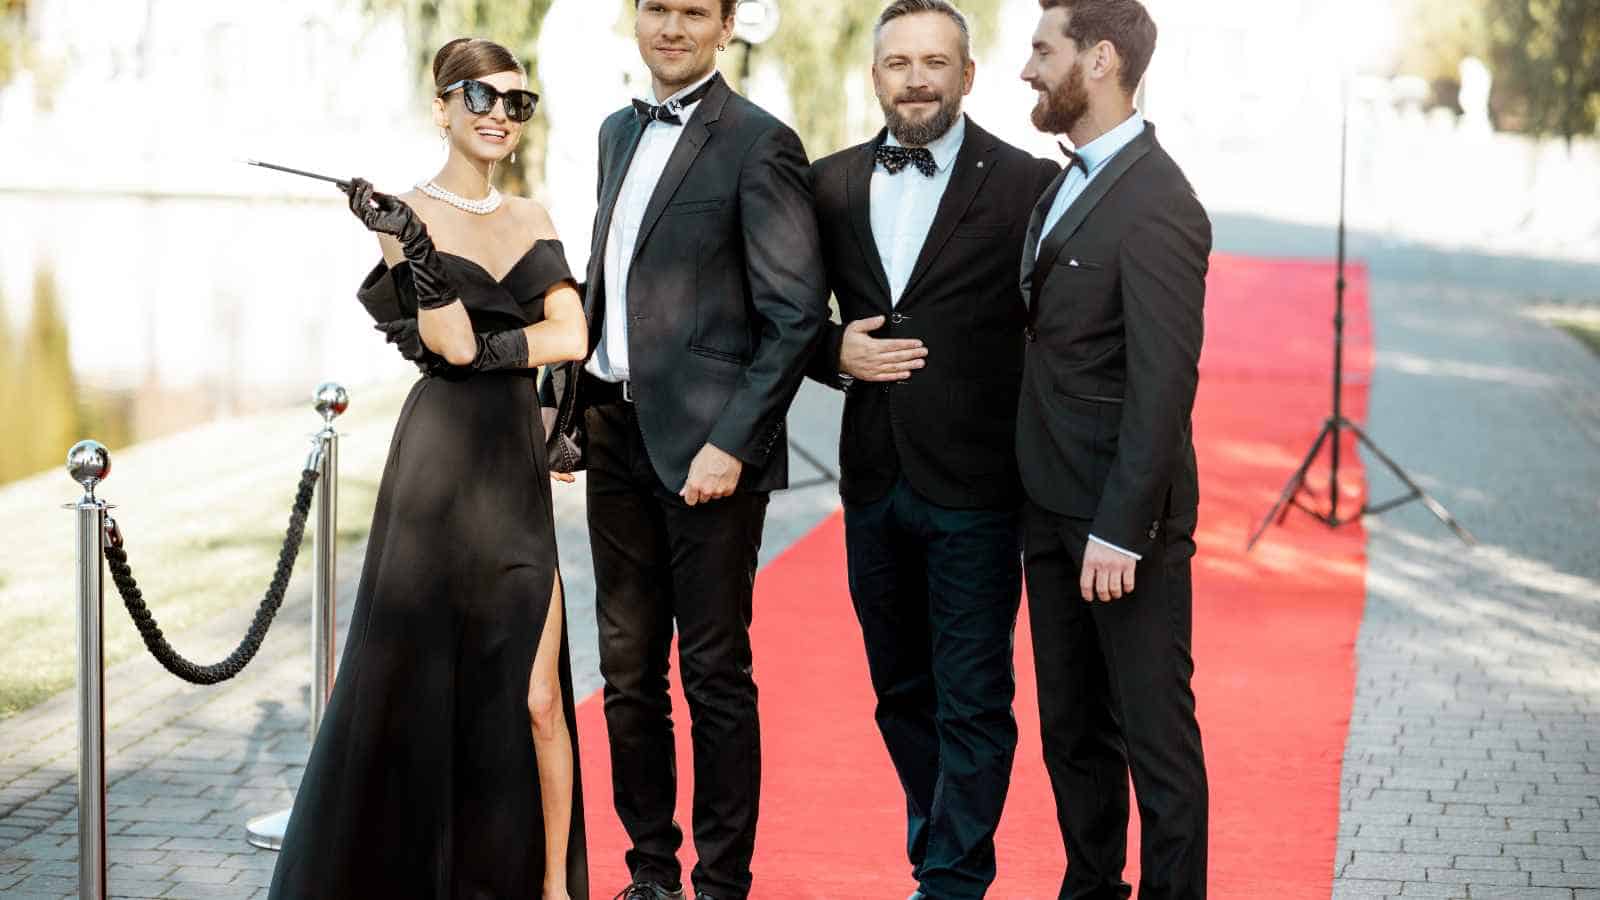 <p>The glitz and glamour of movie premieres have been put on hold during the pandemic. While we may see a return to red-carpet events, they are unlikely to be as extravagant and star-studded as before.</p>